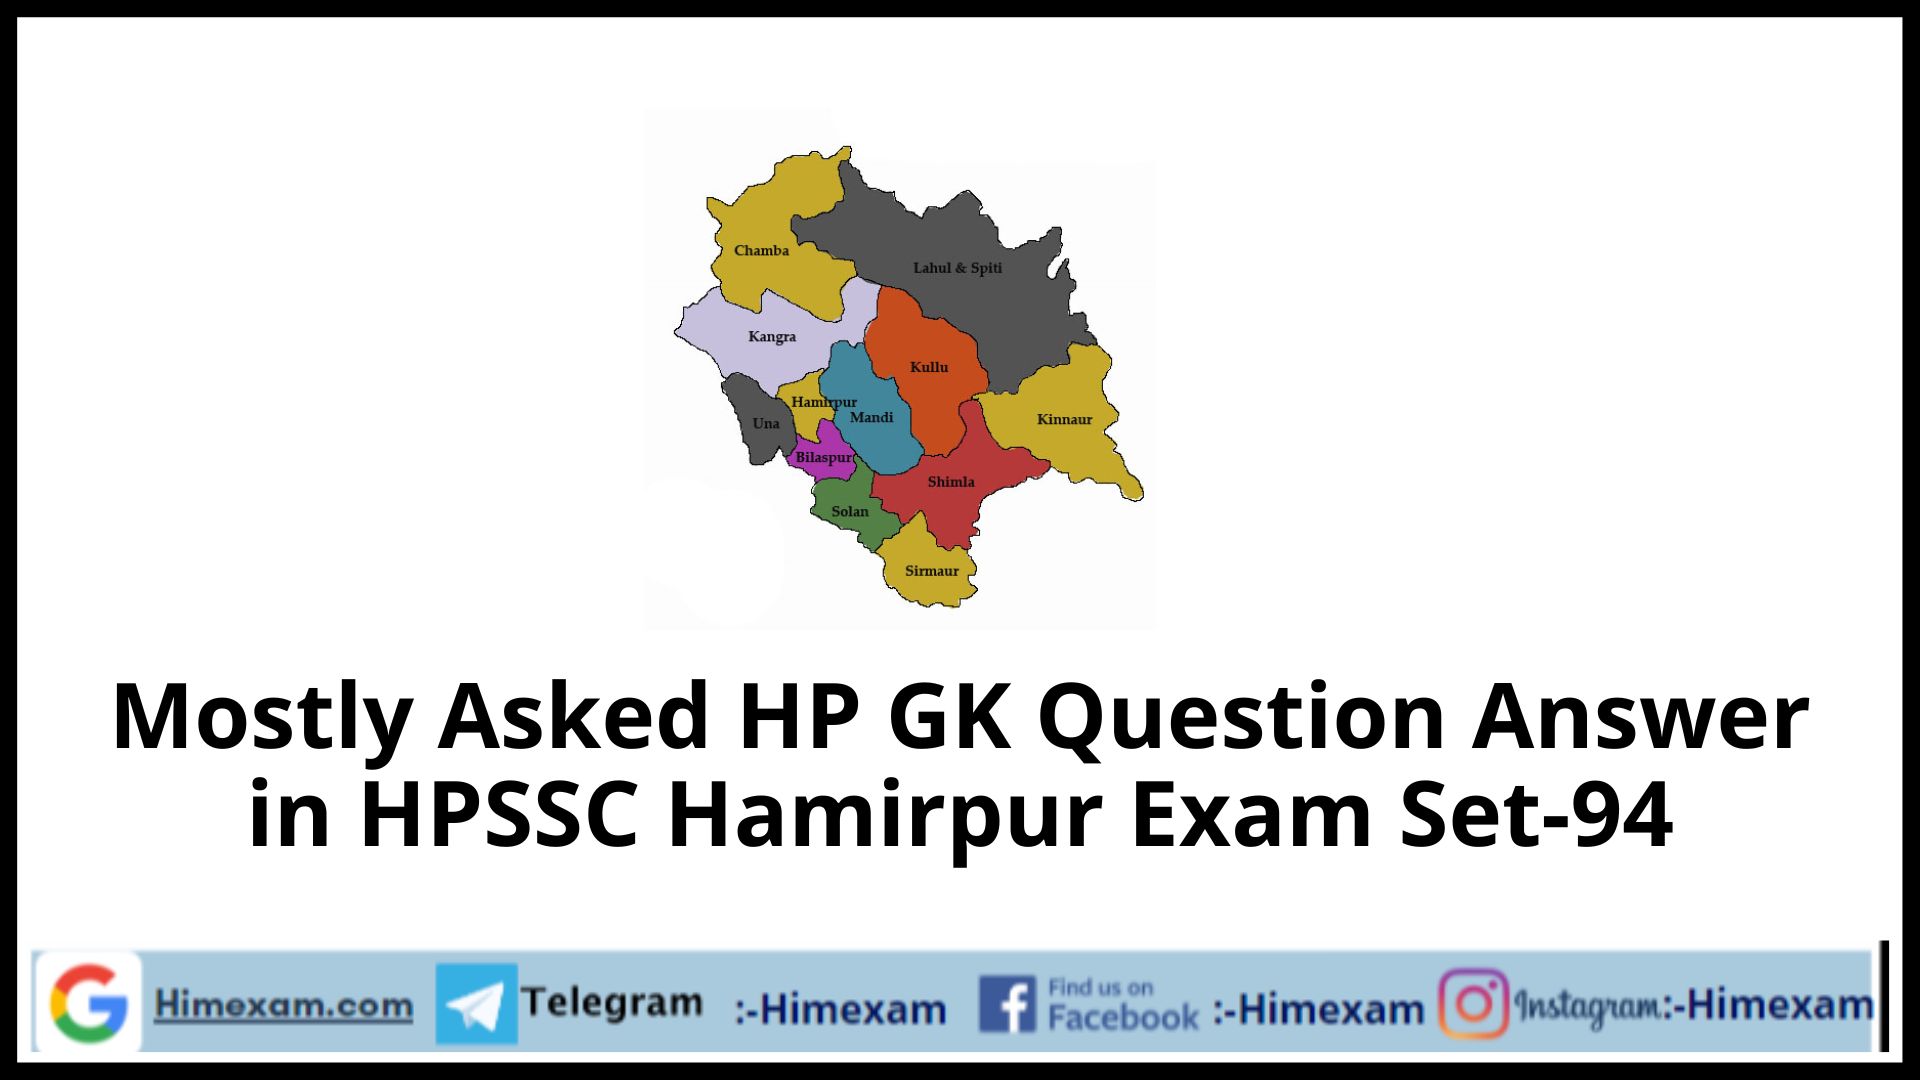 Mostly Asked HP GK Question Answer in HPSSC Hamirpur Exam Set-94